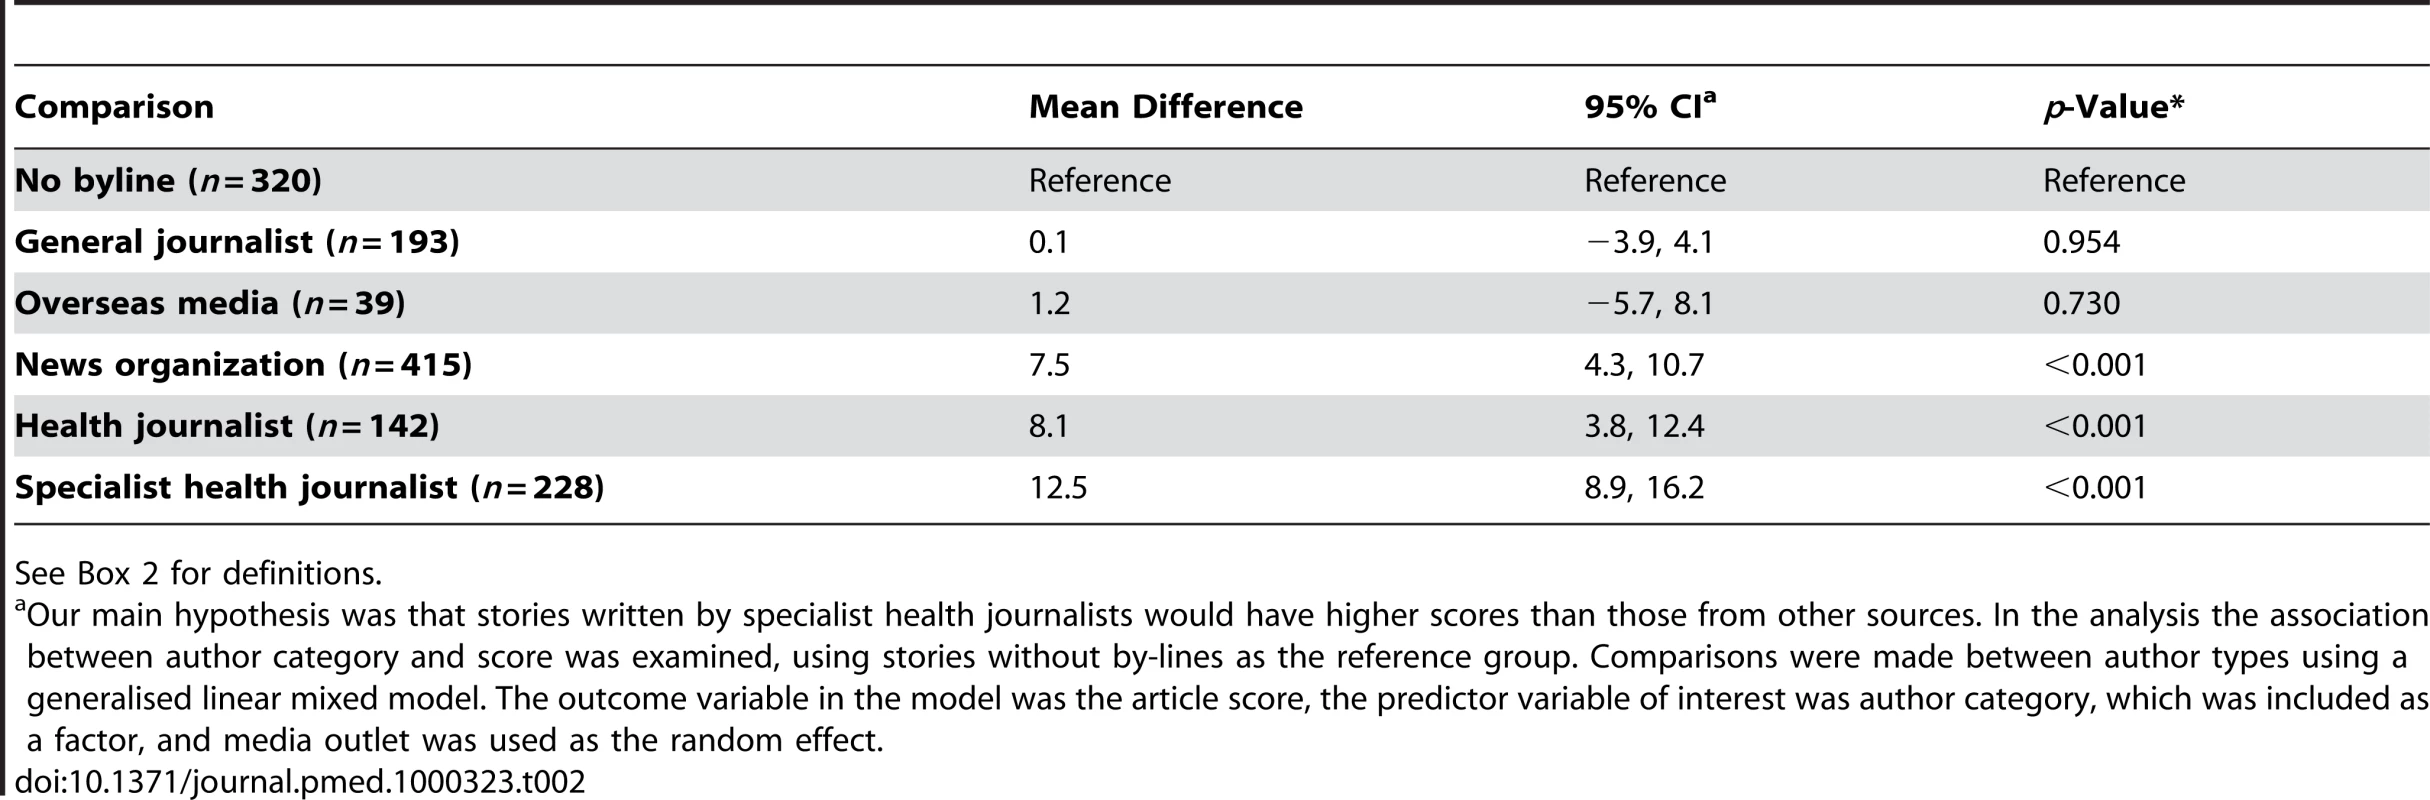 Comparisons of Media Doctor scores for stories written by different categories of journalists.